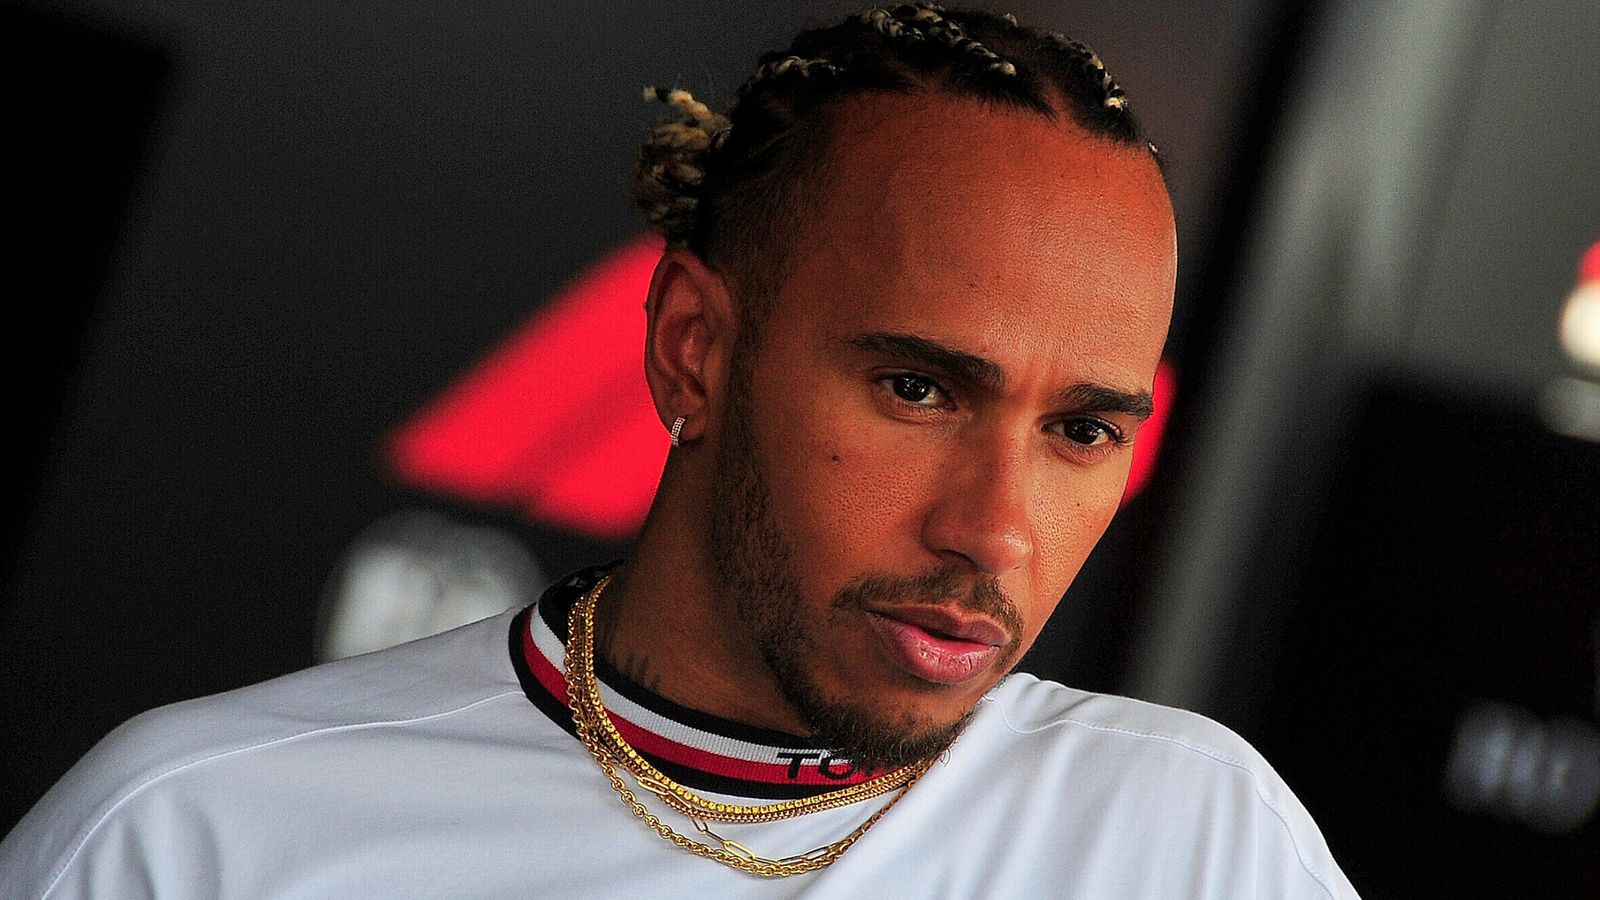 Hungarian GP: Lewis Hamilton predicts ‘tough weekend’ as Mercedes struggle in practice